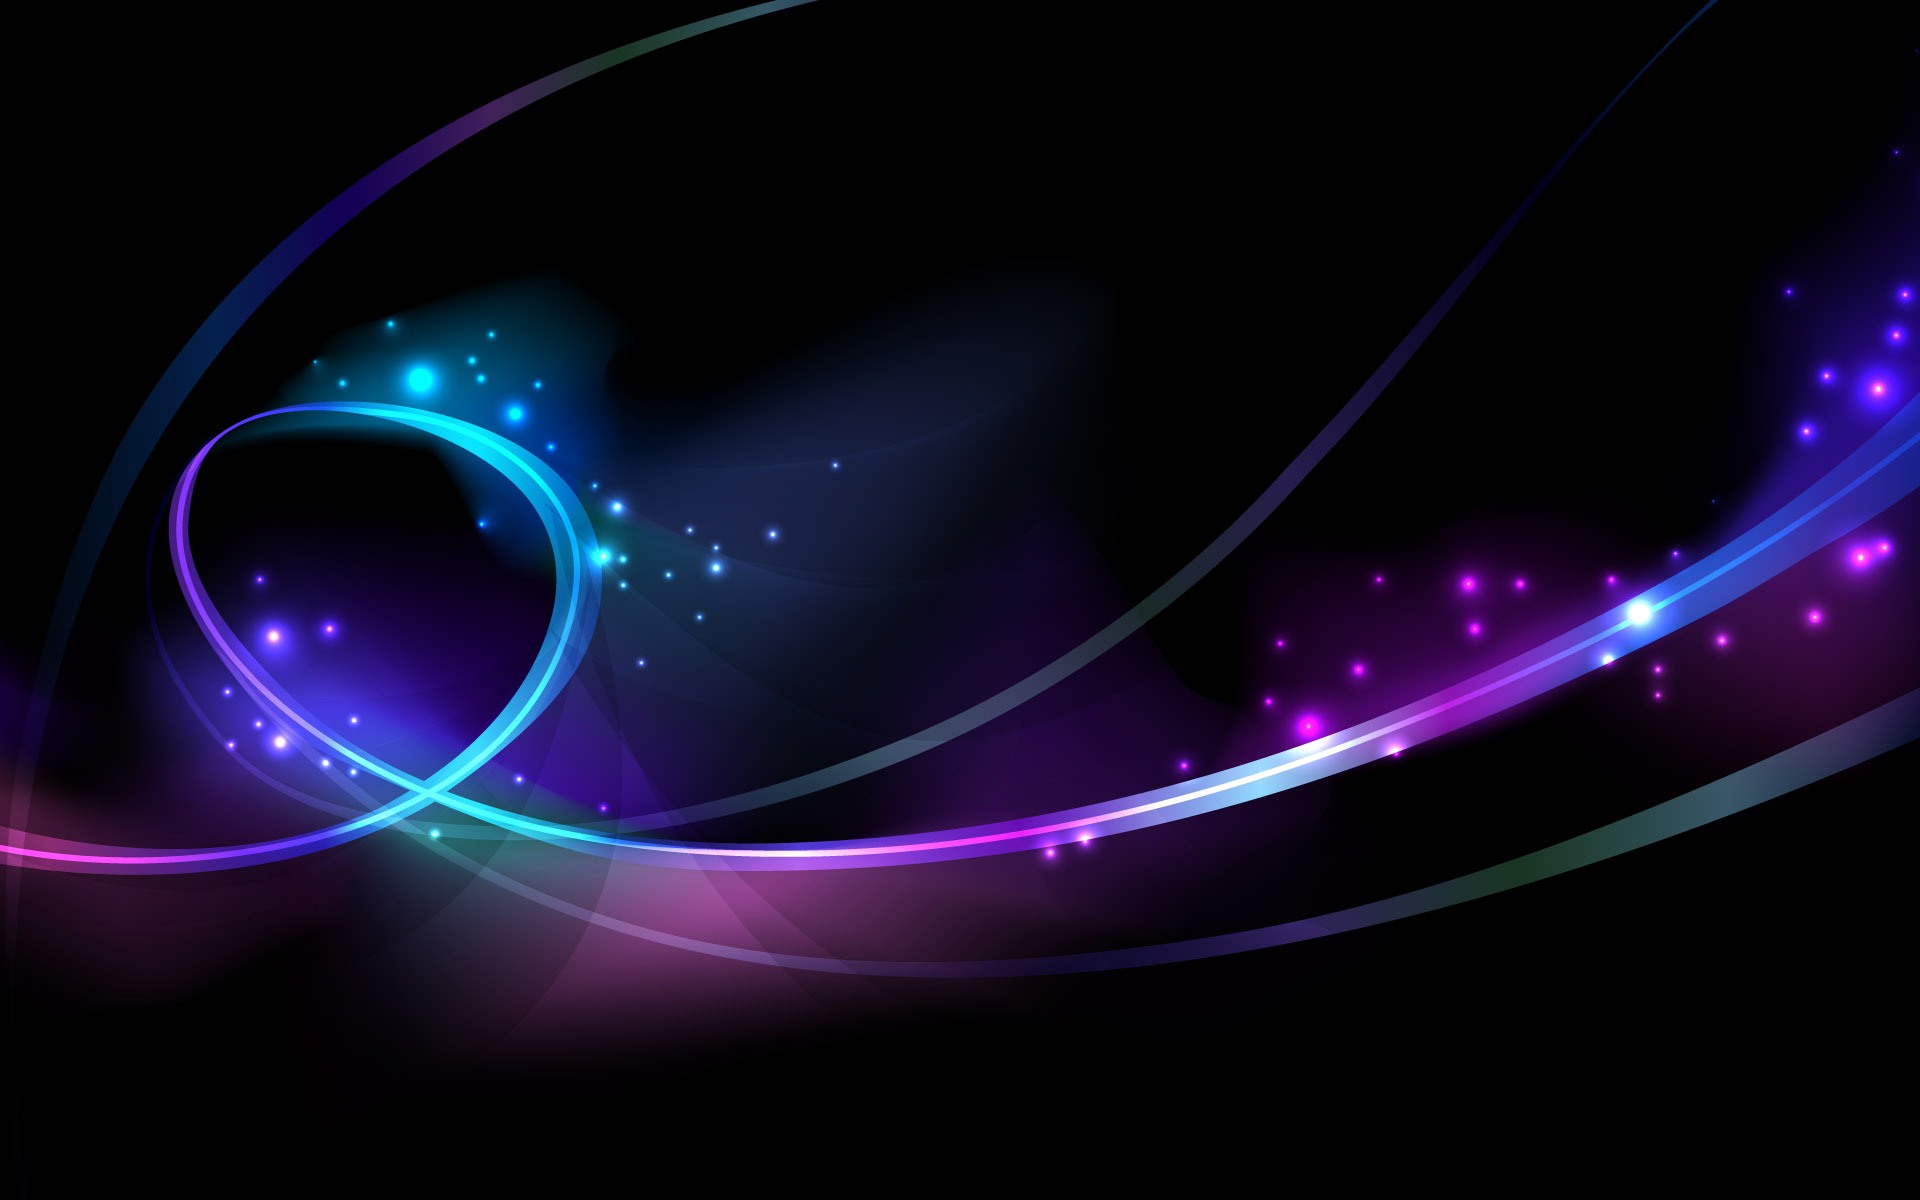 Purple and blue twirl desktop wallpaper Black Background and some